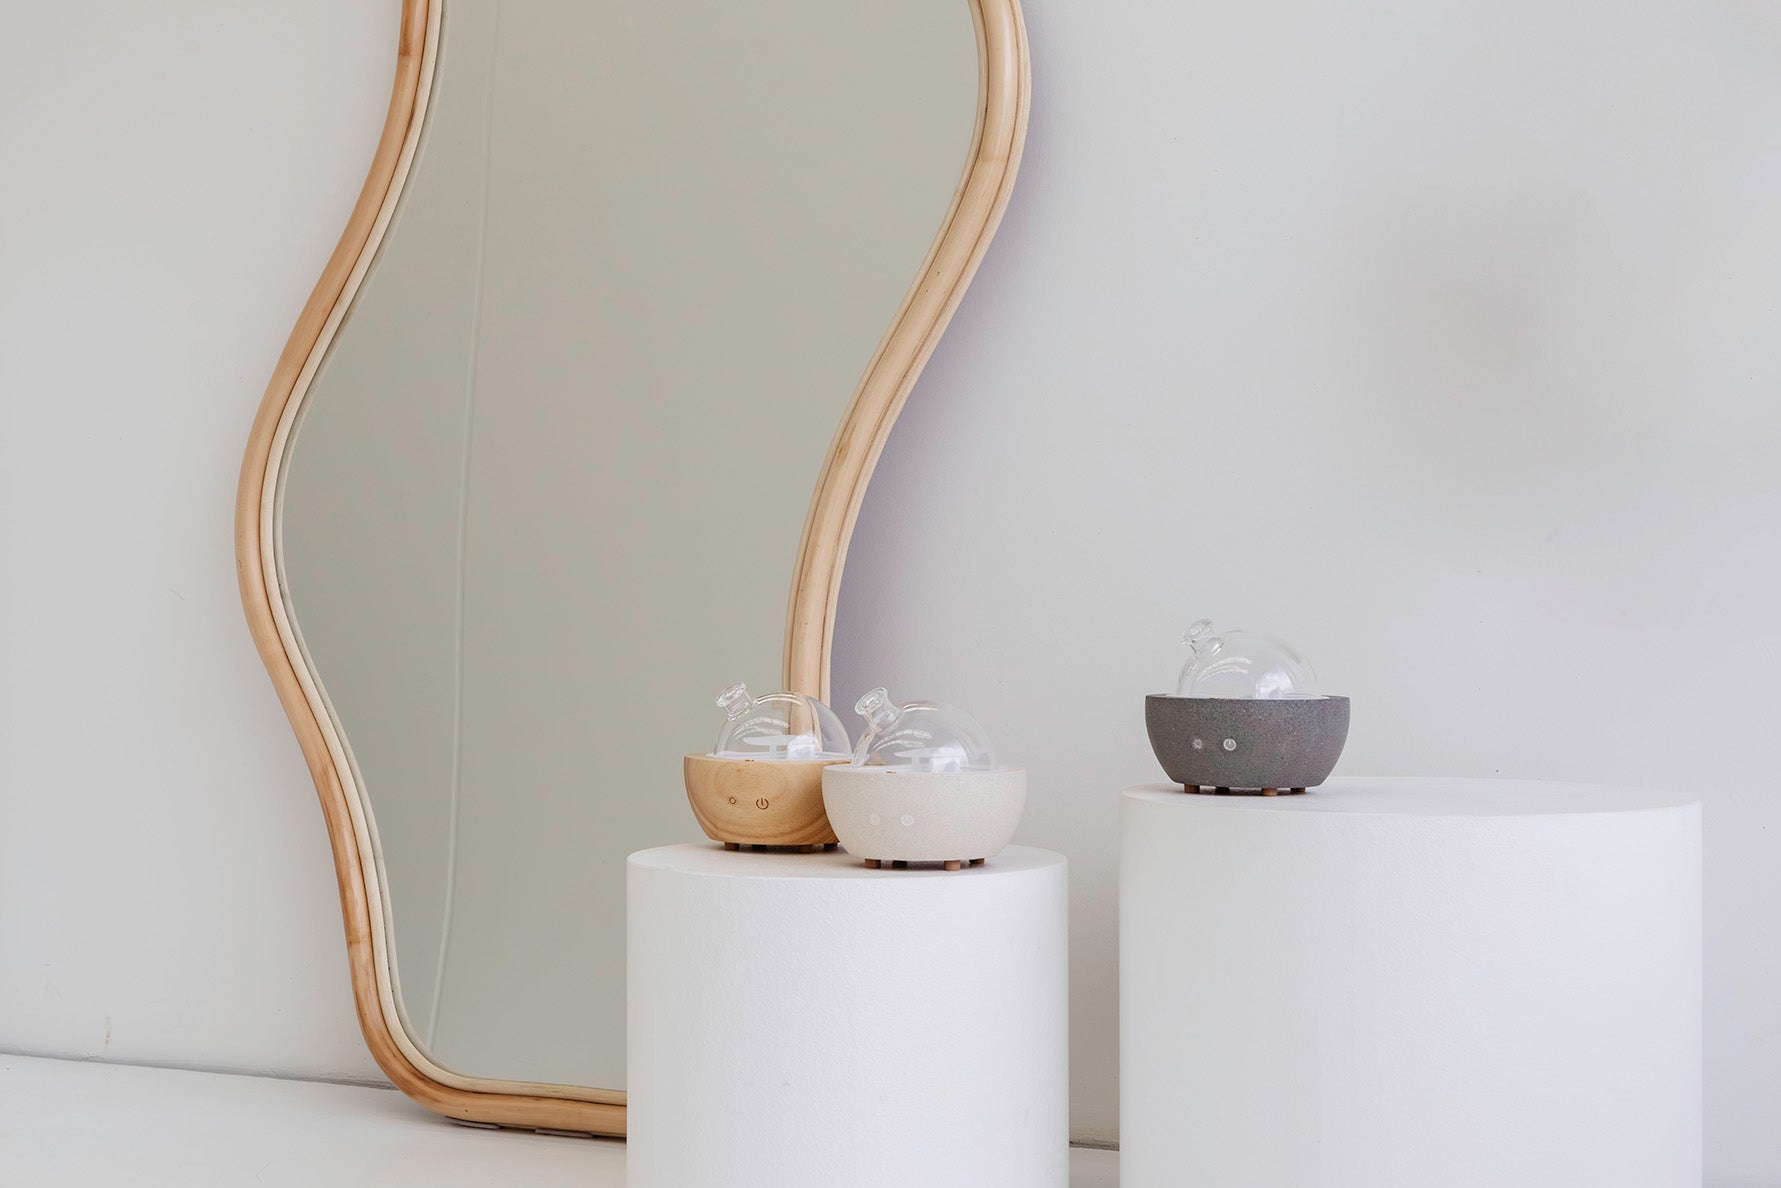 Beautiful essential oil diffusers in white, wood and concrete finishes